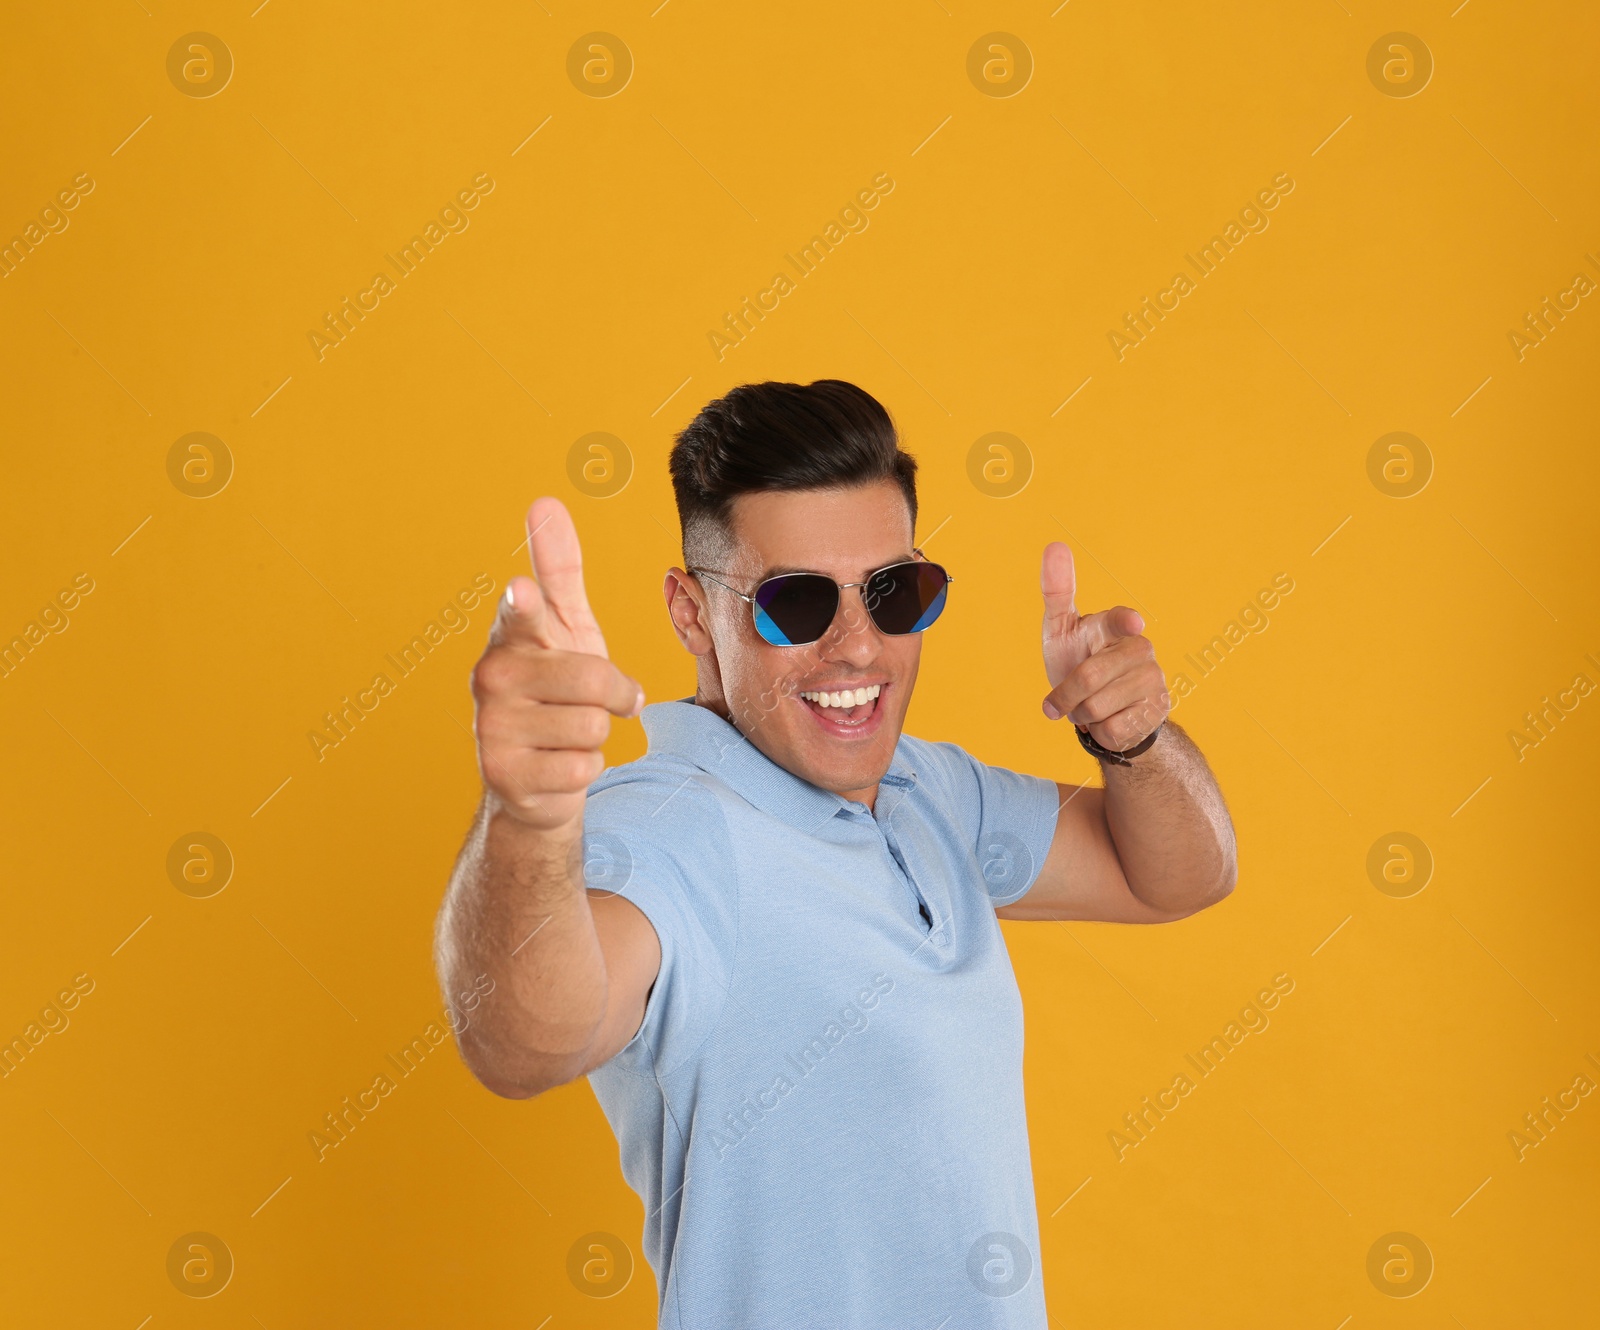 Photo of Excited man wearing sunglasses on yellow background